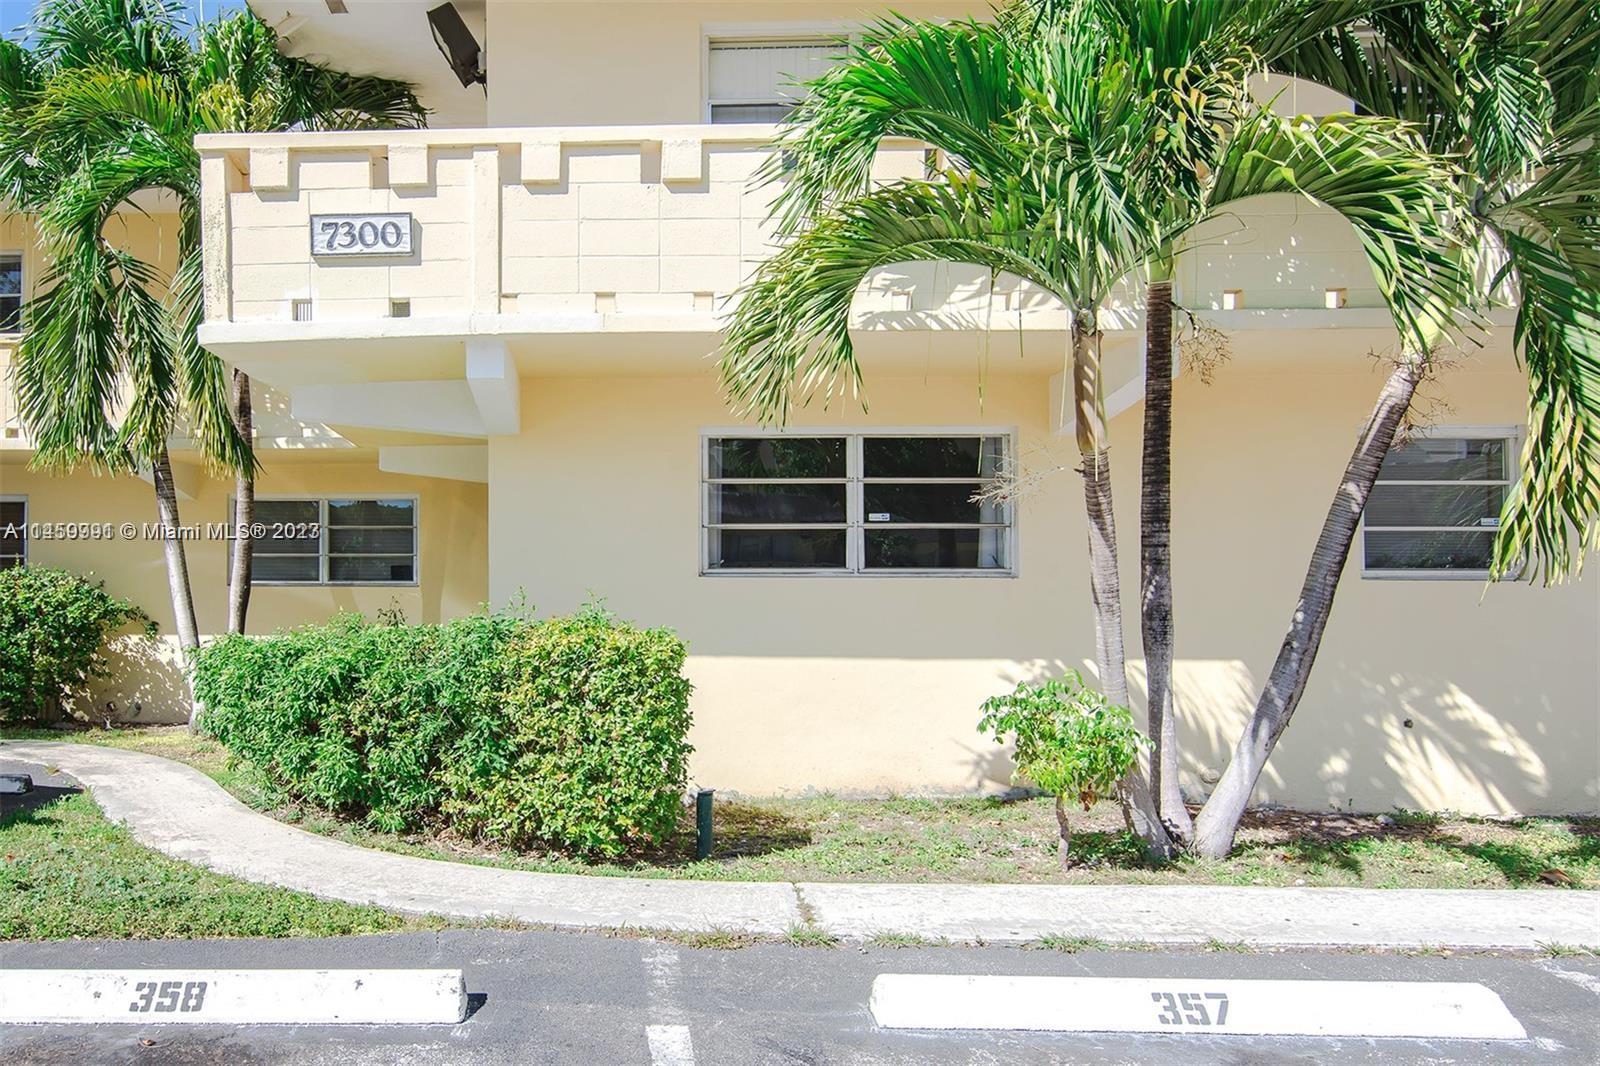 Beautiful garden apt 2/2 totally remodeled. Wood floors, screened porch, a fan in every room, washer/dryer inside unit. Great location, walking distance to Dadeland.